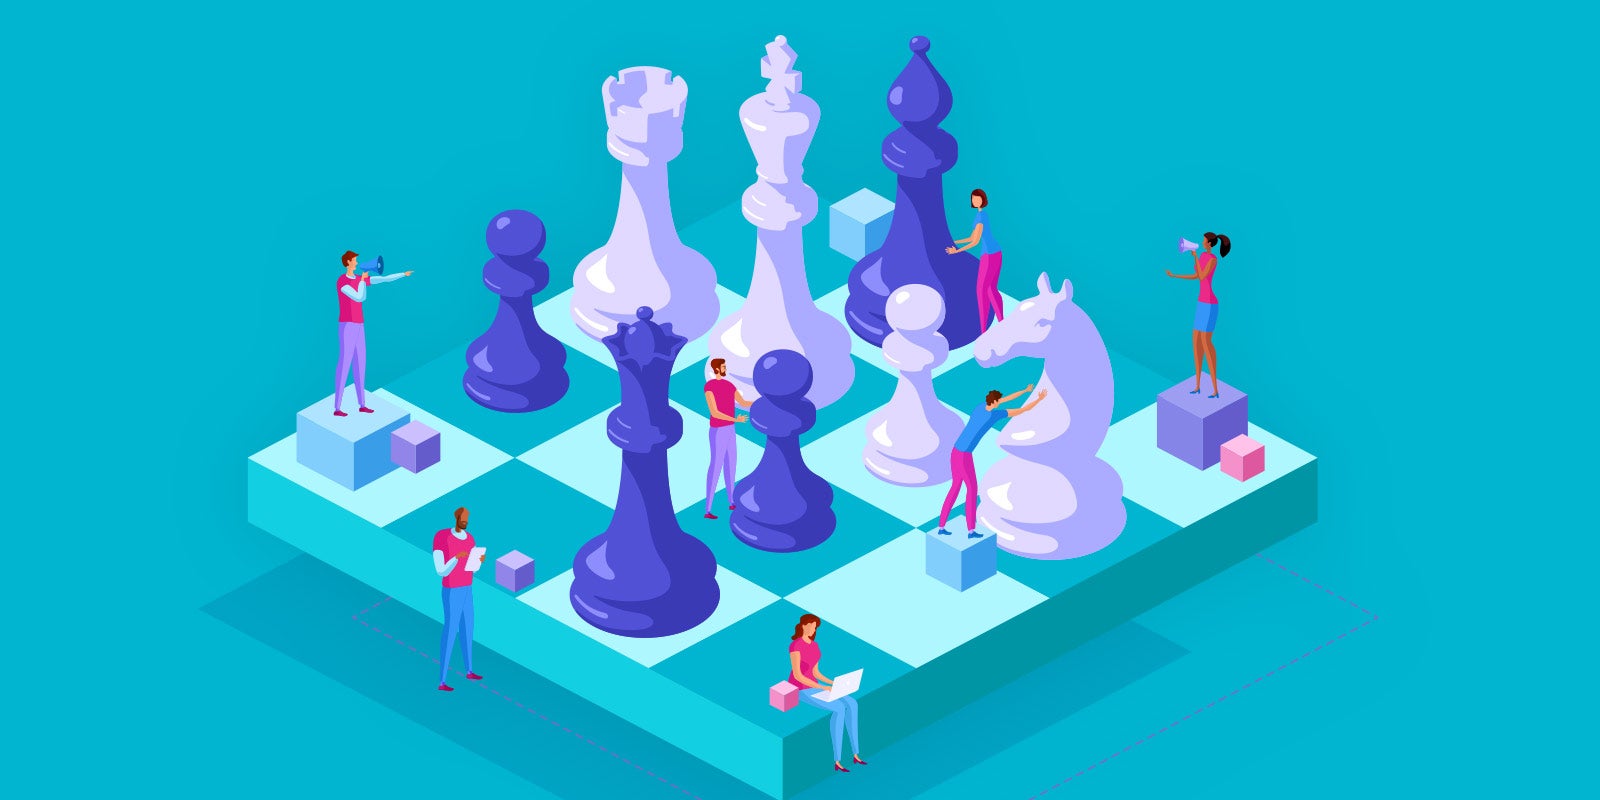 chess board with chess pieces and animated people "pieces" to show how important context is when it comes to your learning and development strategy